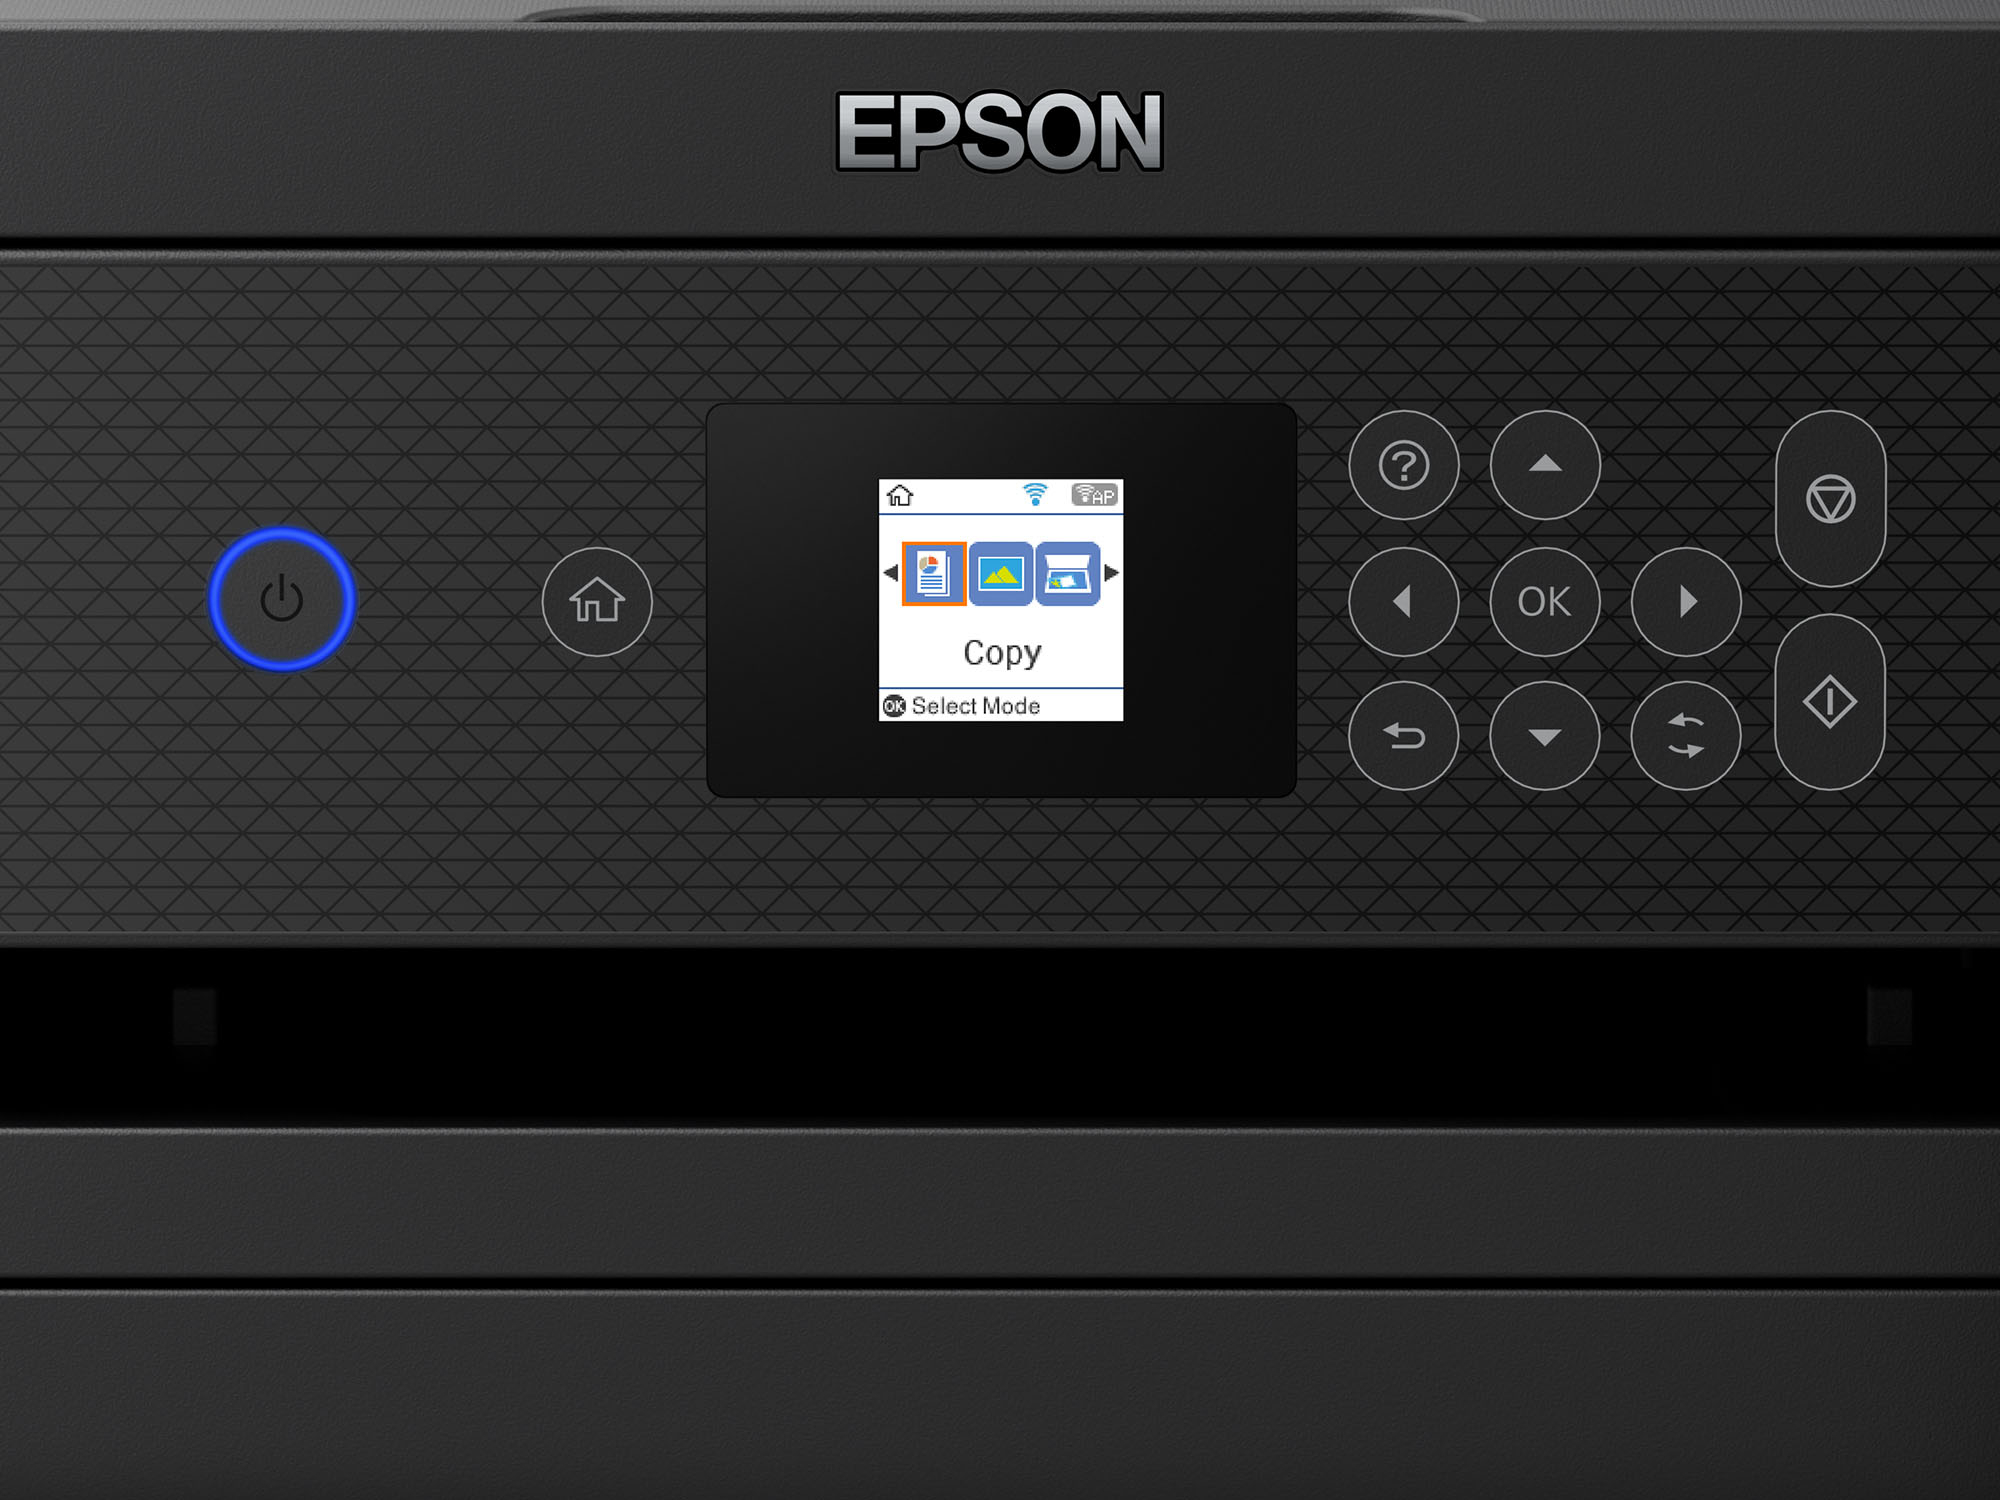 Epson EcoTank ET-2850 Wireless Color All-in-One C11CJ63201 B&H